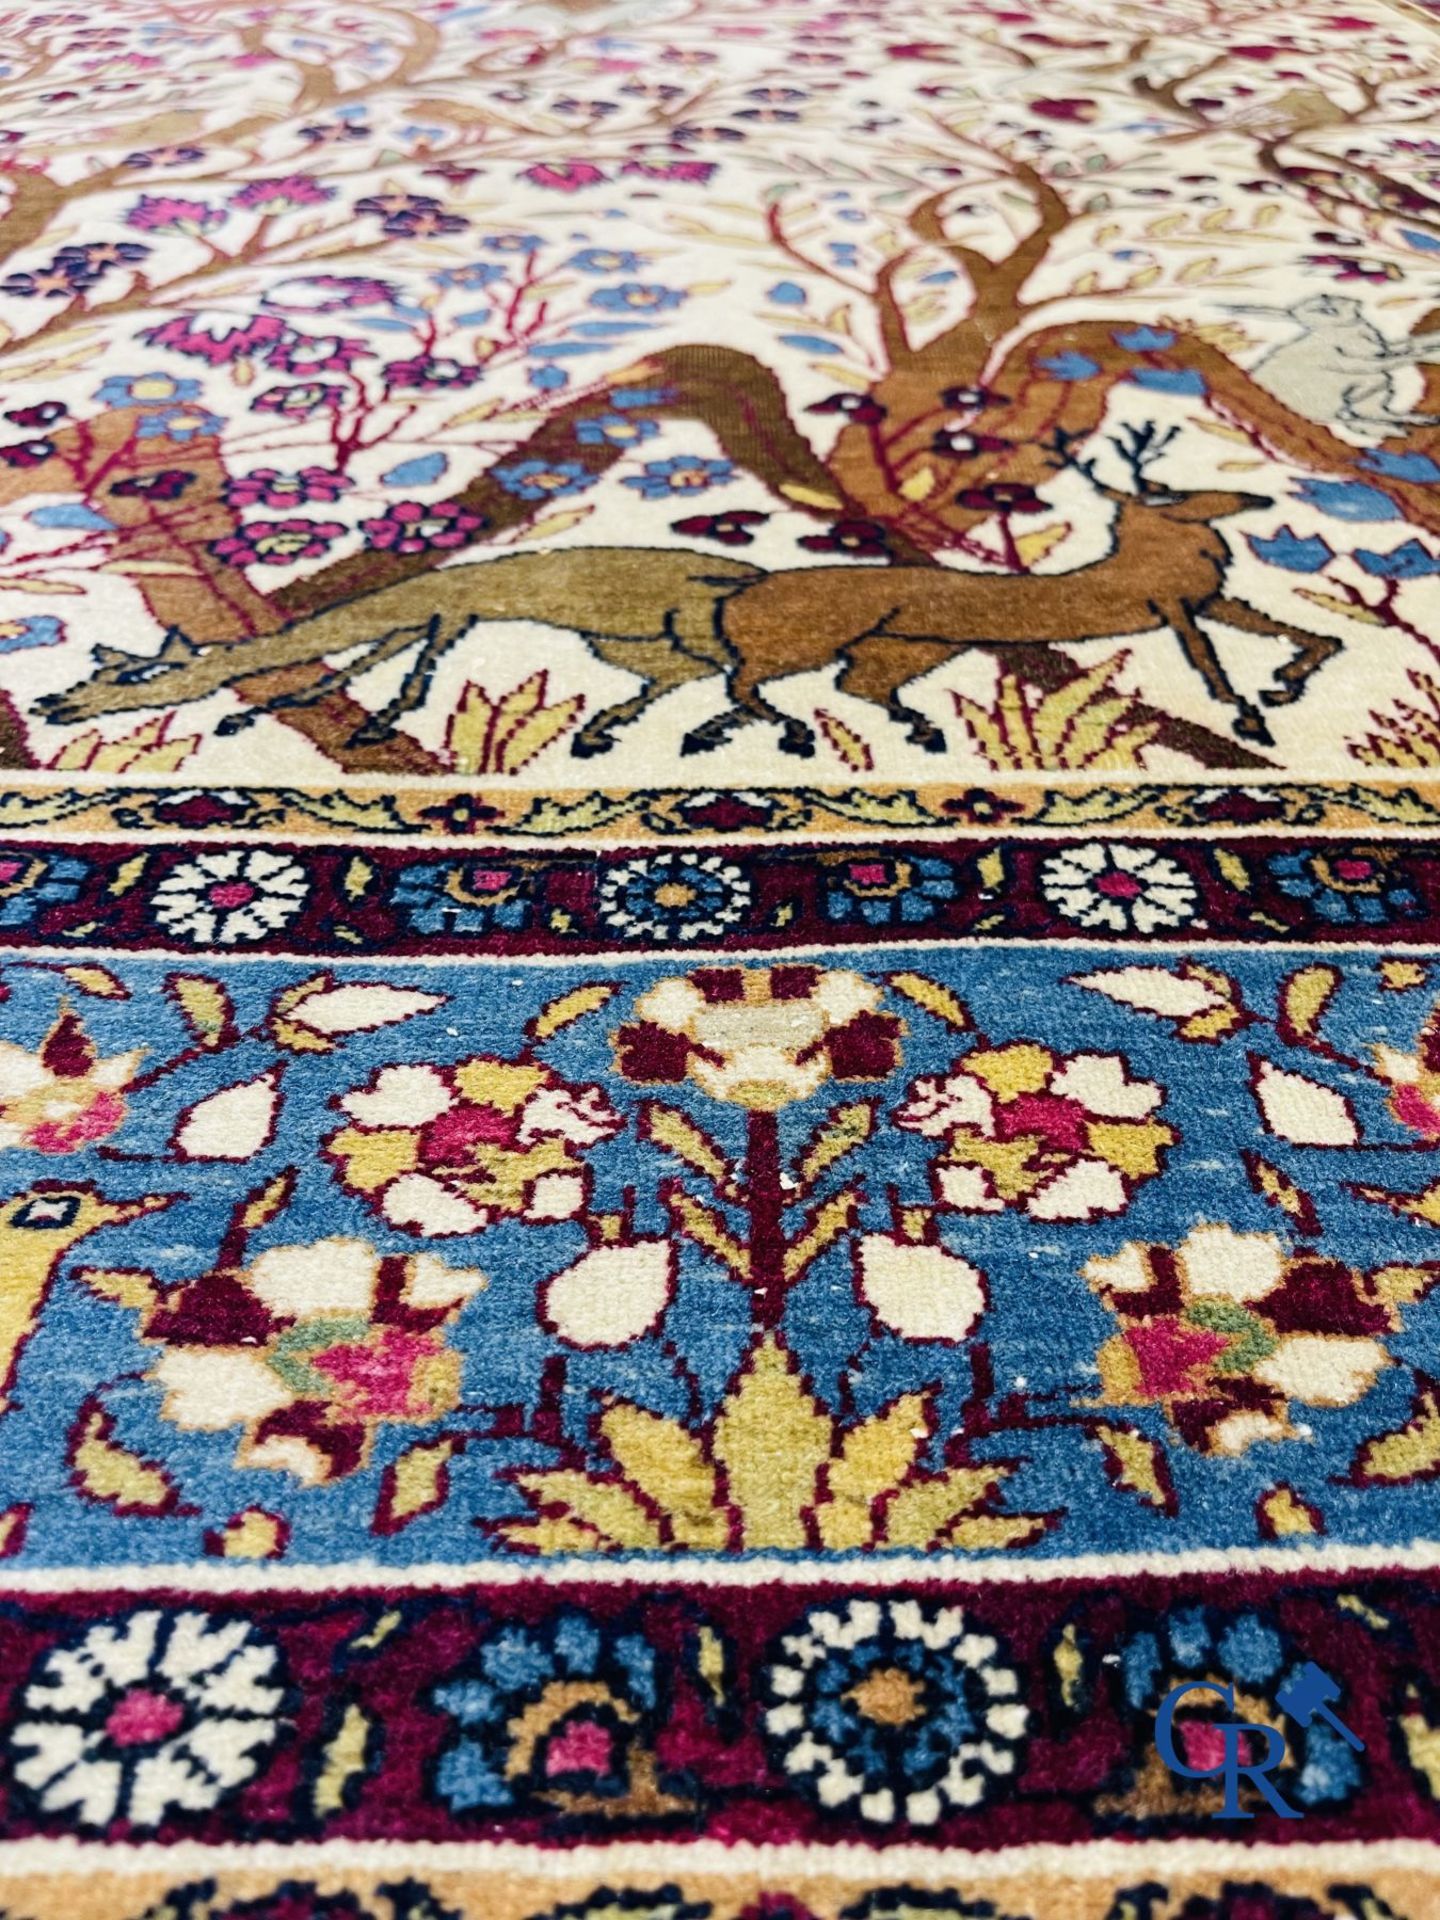 Oriental carpets: Antique oriental carpet with a decor of animals and birds in the forest. - Image 6 of 10